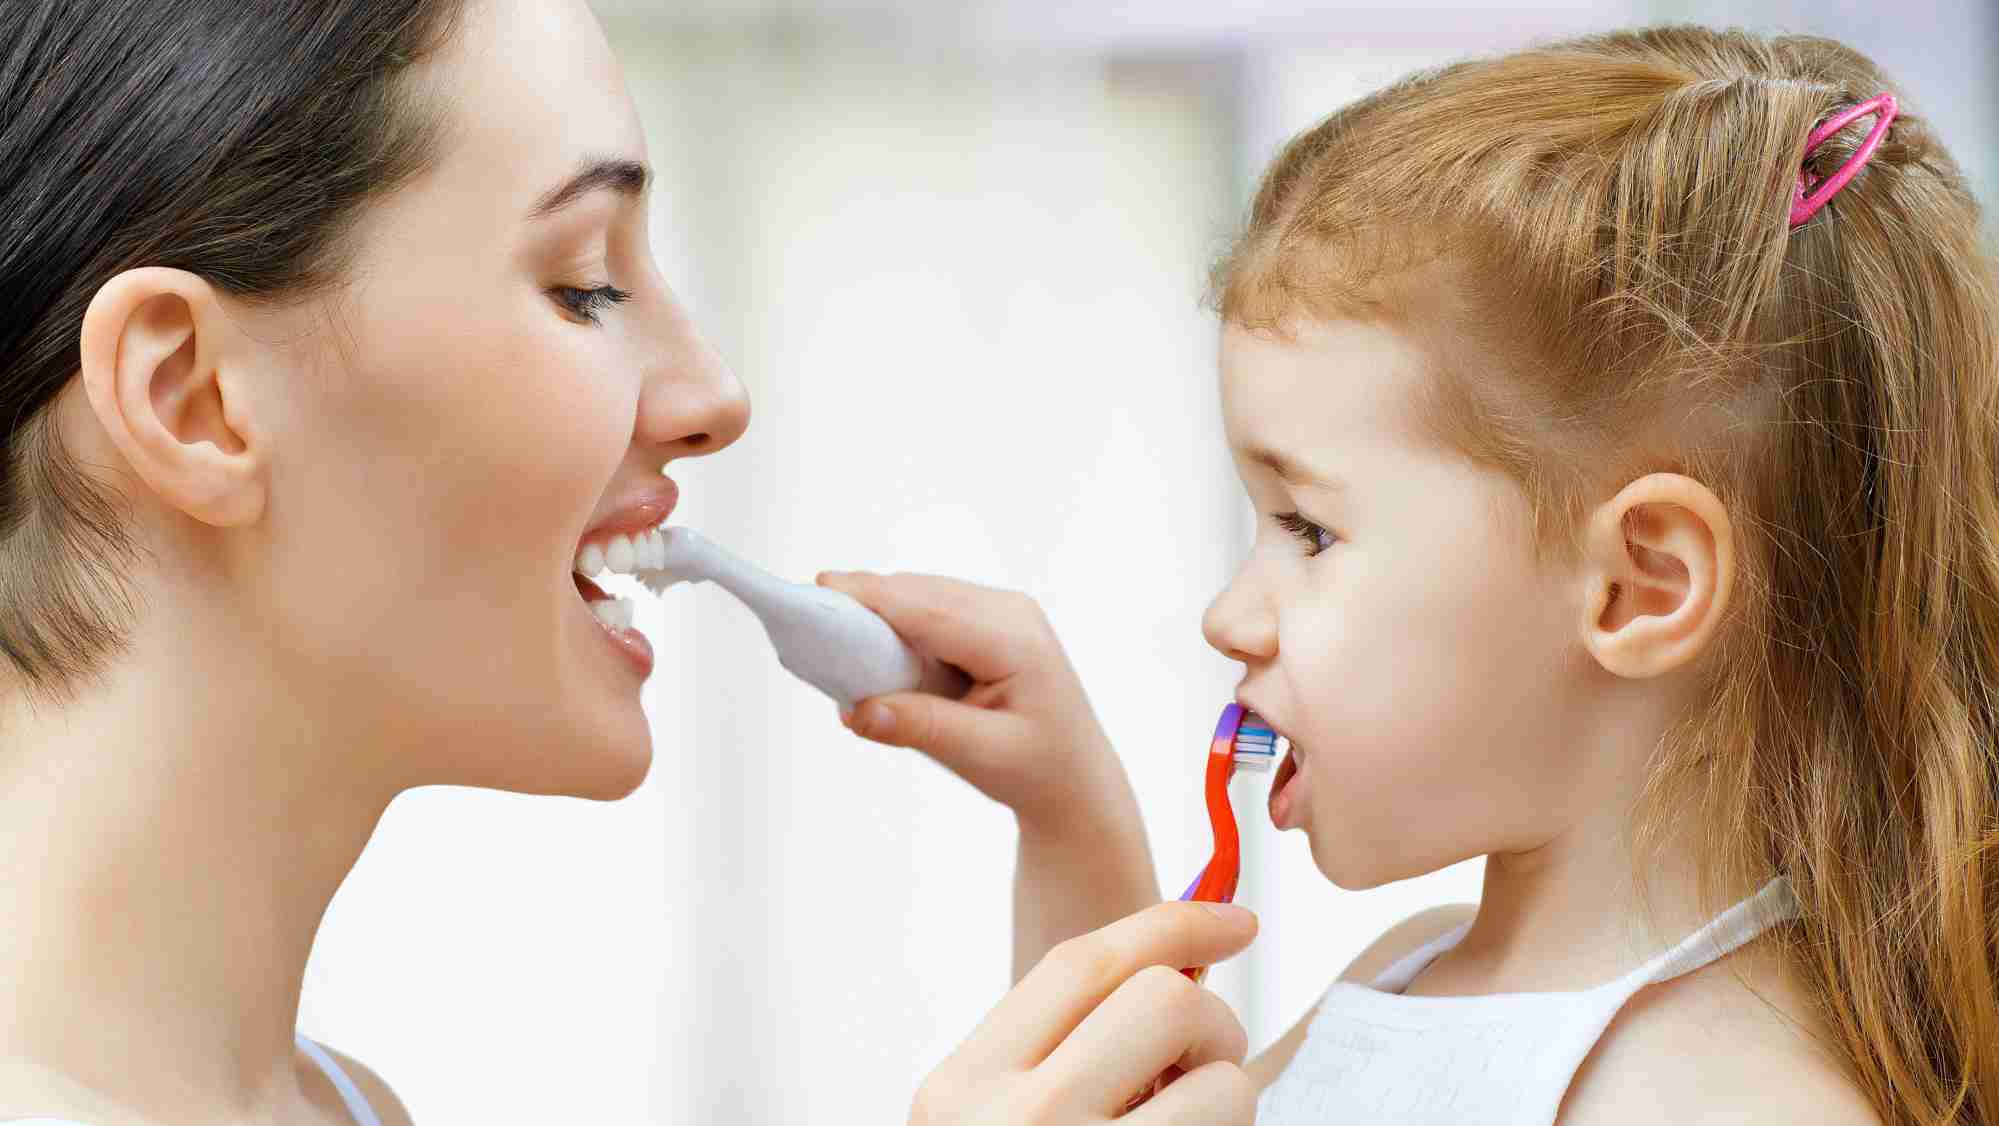 When and How to get started with brushing?